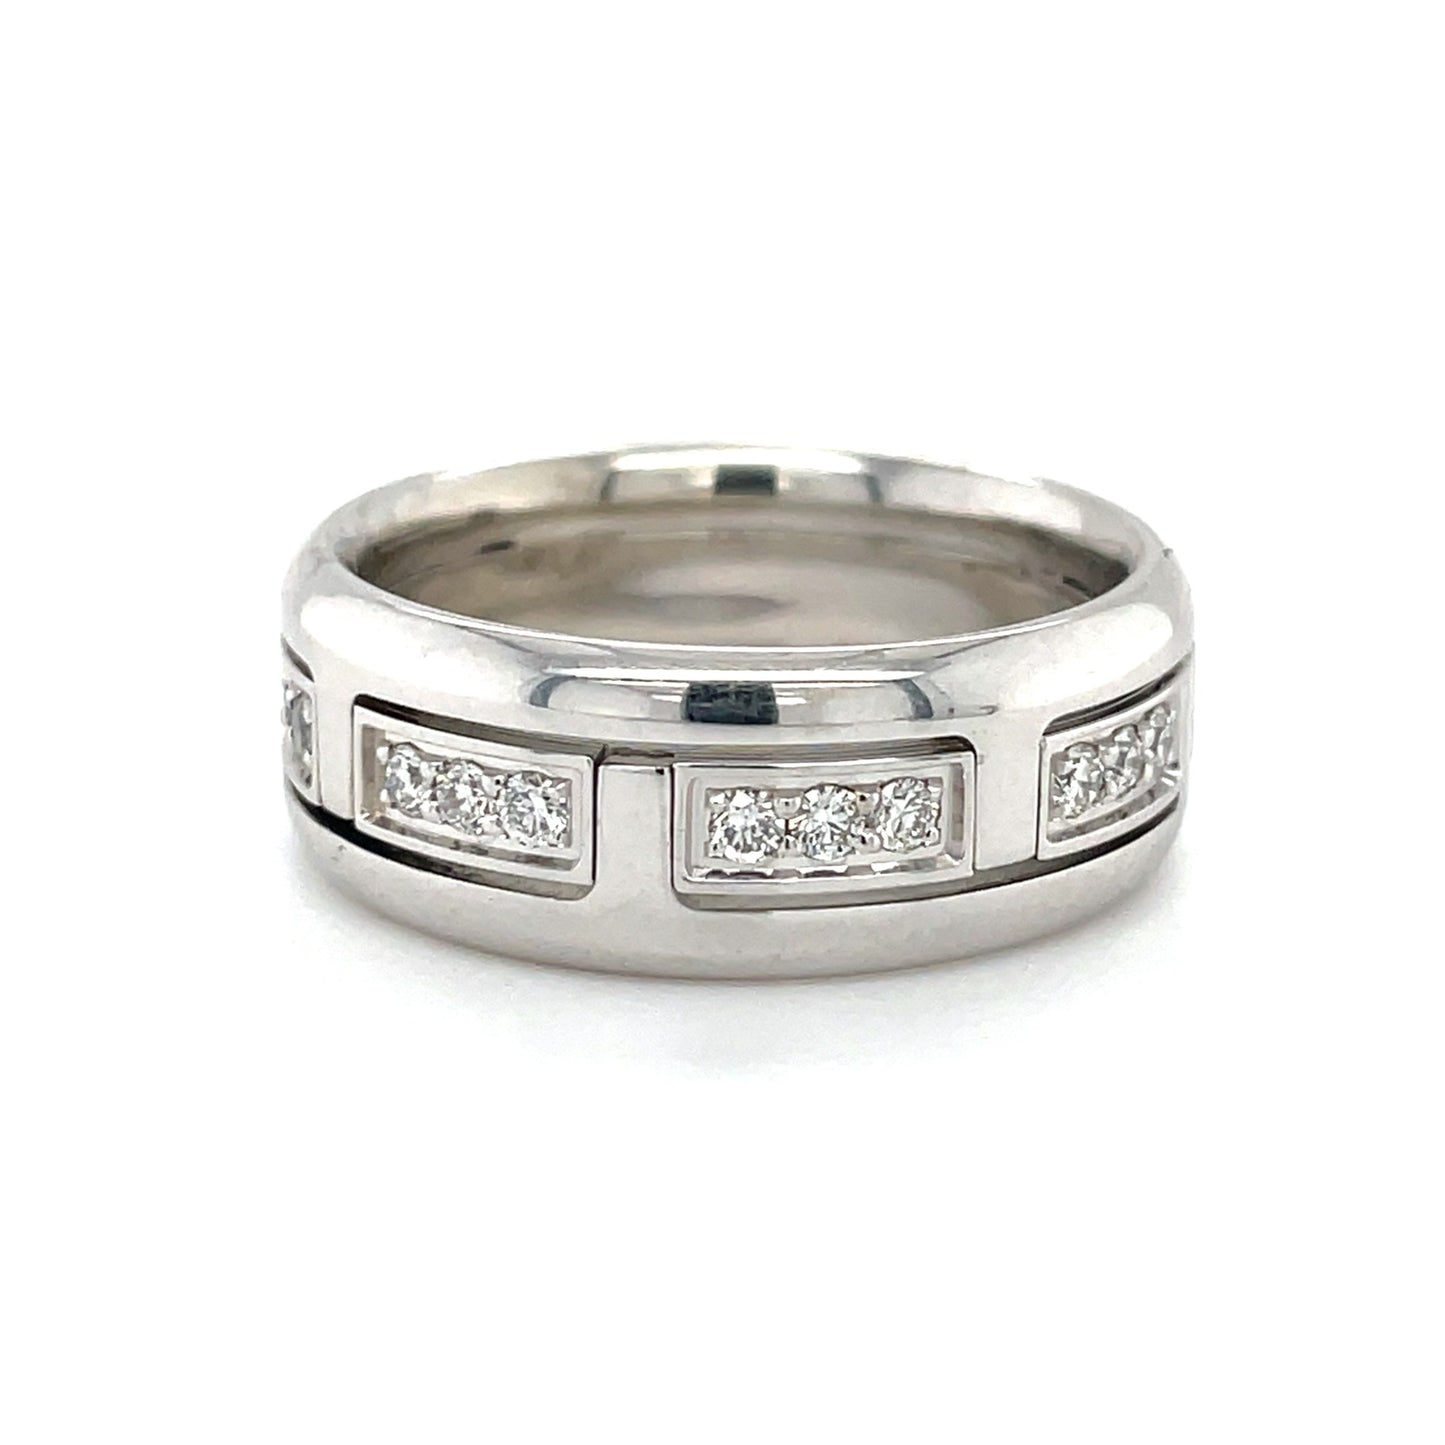 14k White Gold Band With Diamonds #6521 designed by Michael's Custom Jewelers on Cape Cod